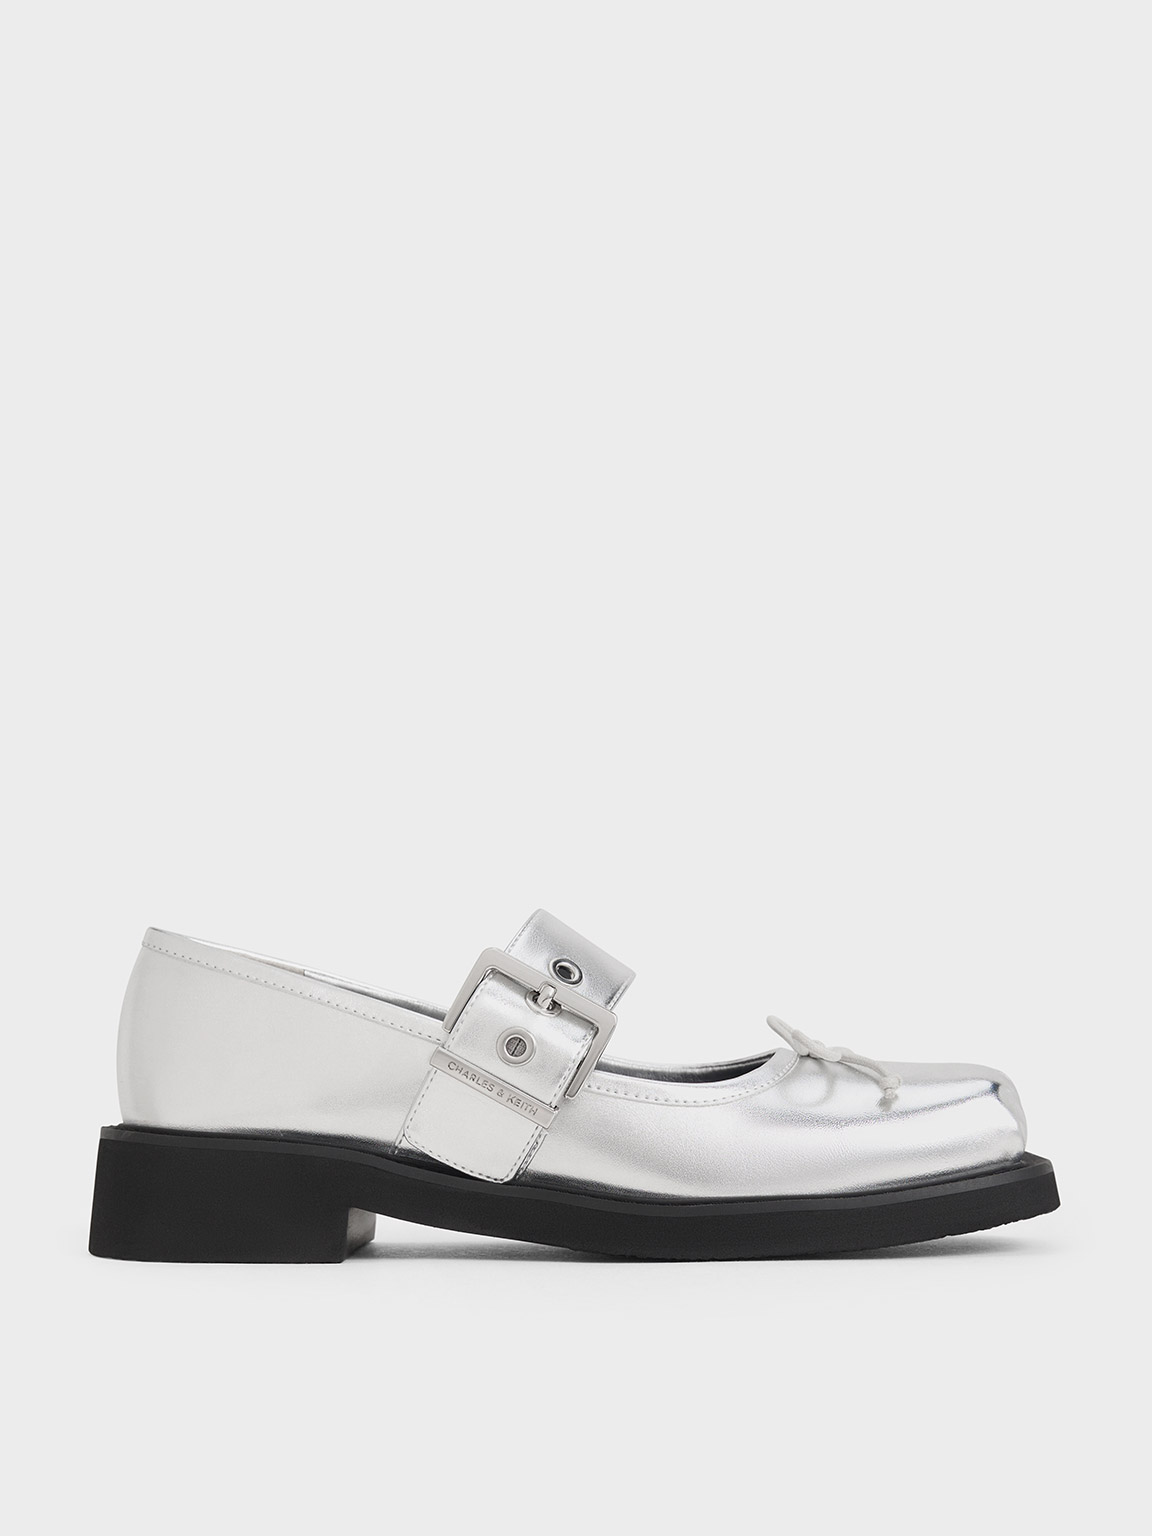 Charles & Keith Metallic Bow Buckled Mary Janes In Silver